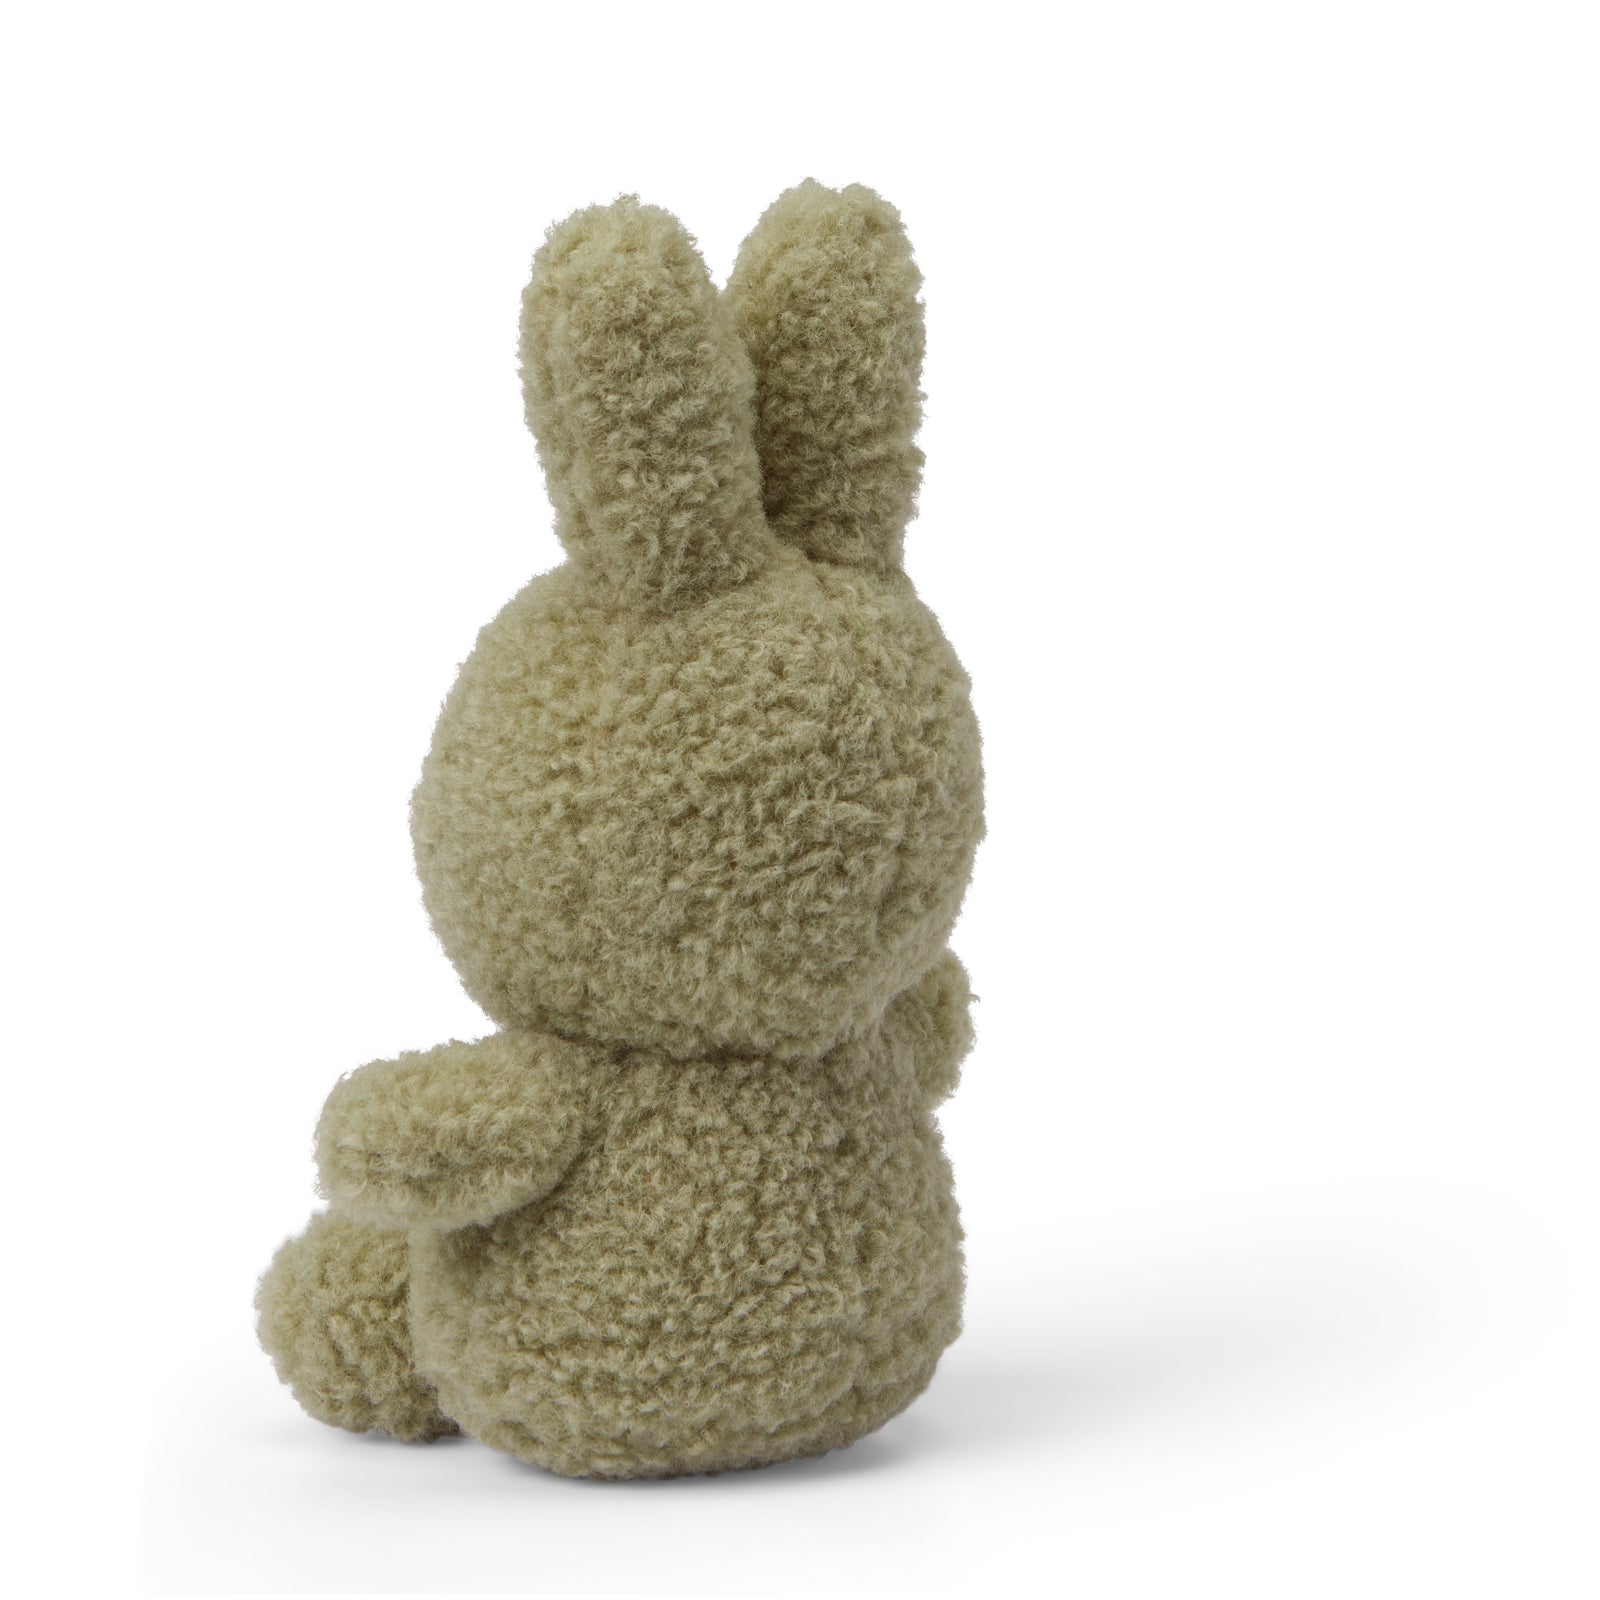 Back view of green teddy Miffy the rabbit